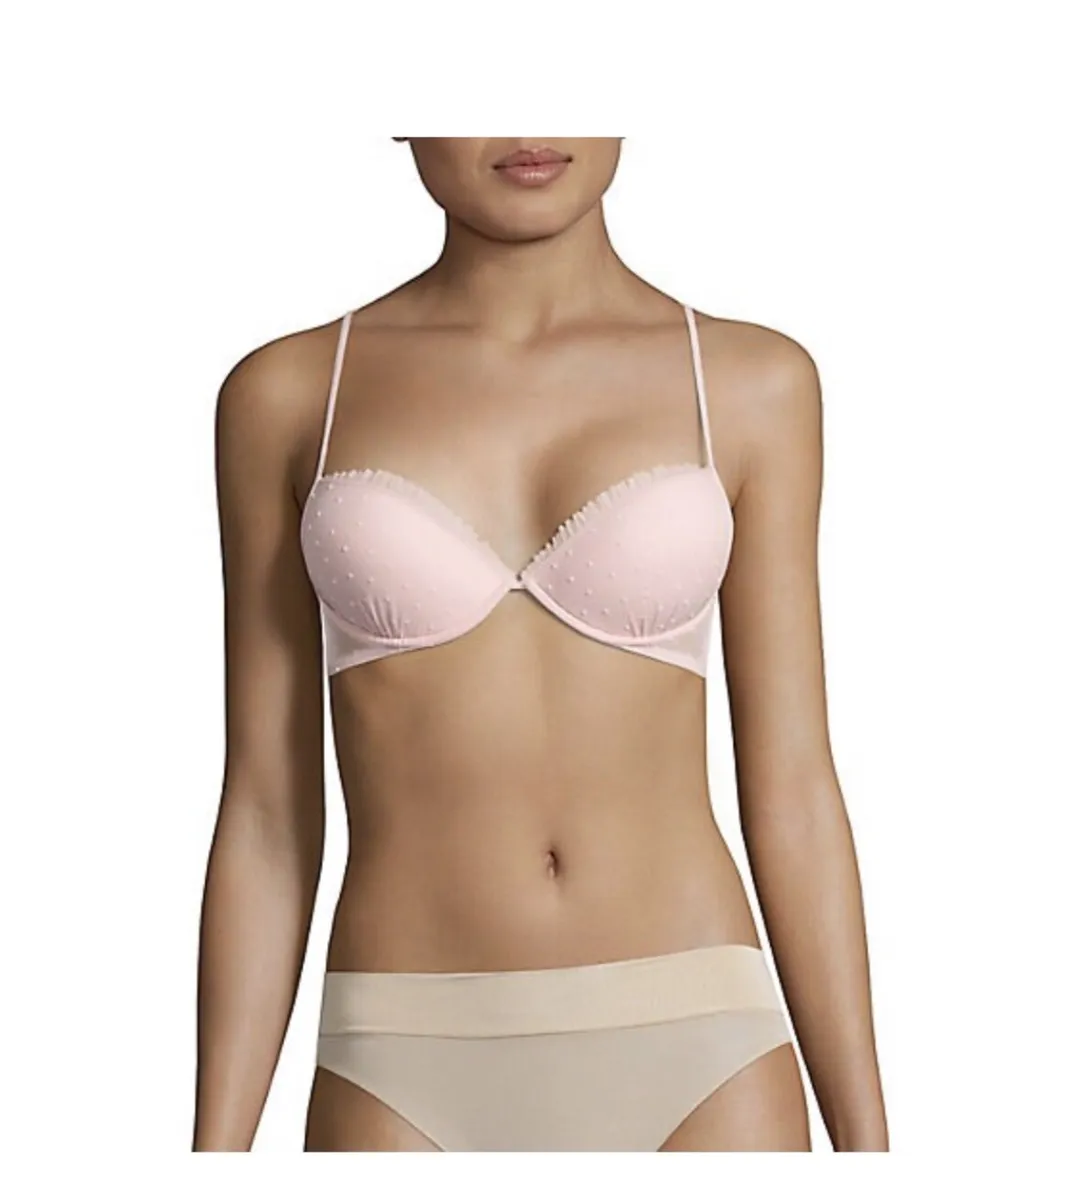 ciska swart recommends what do 32a breast look like pic